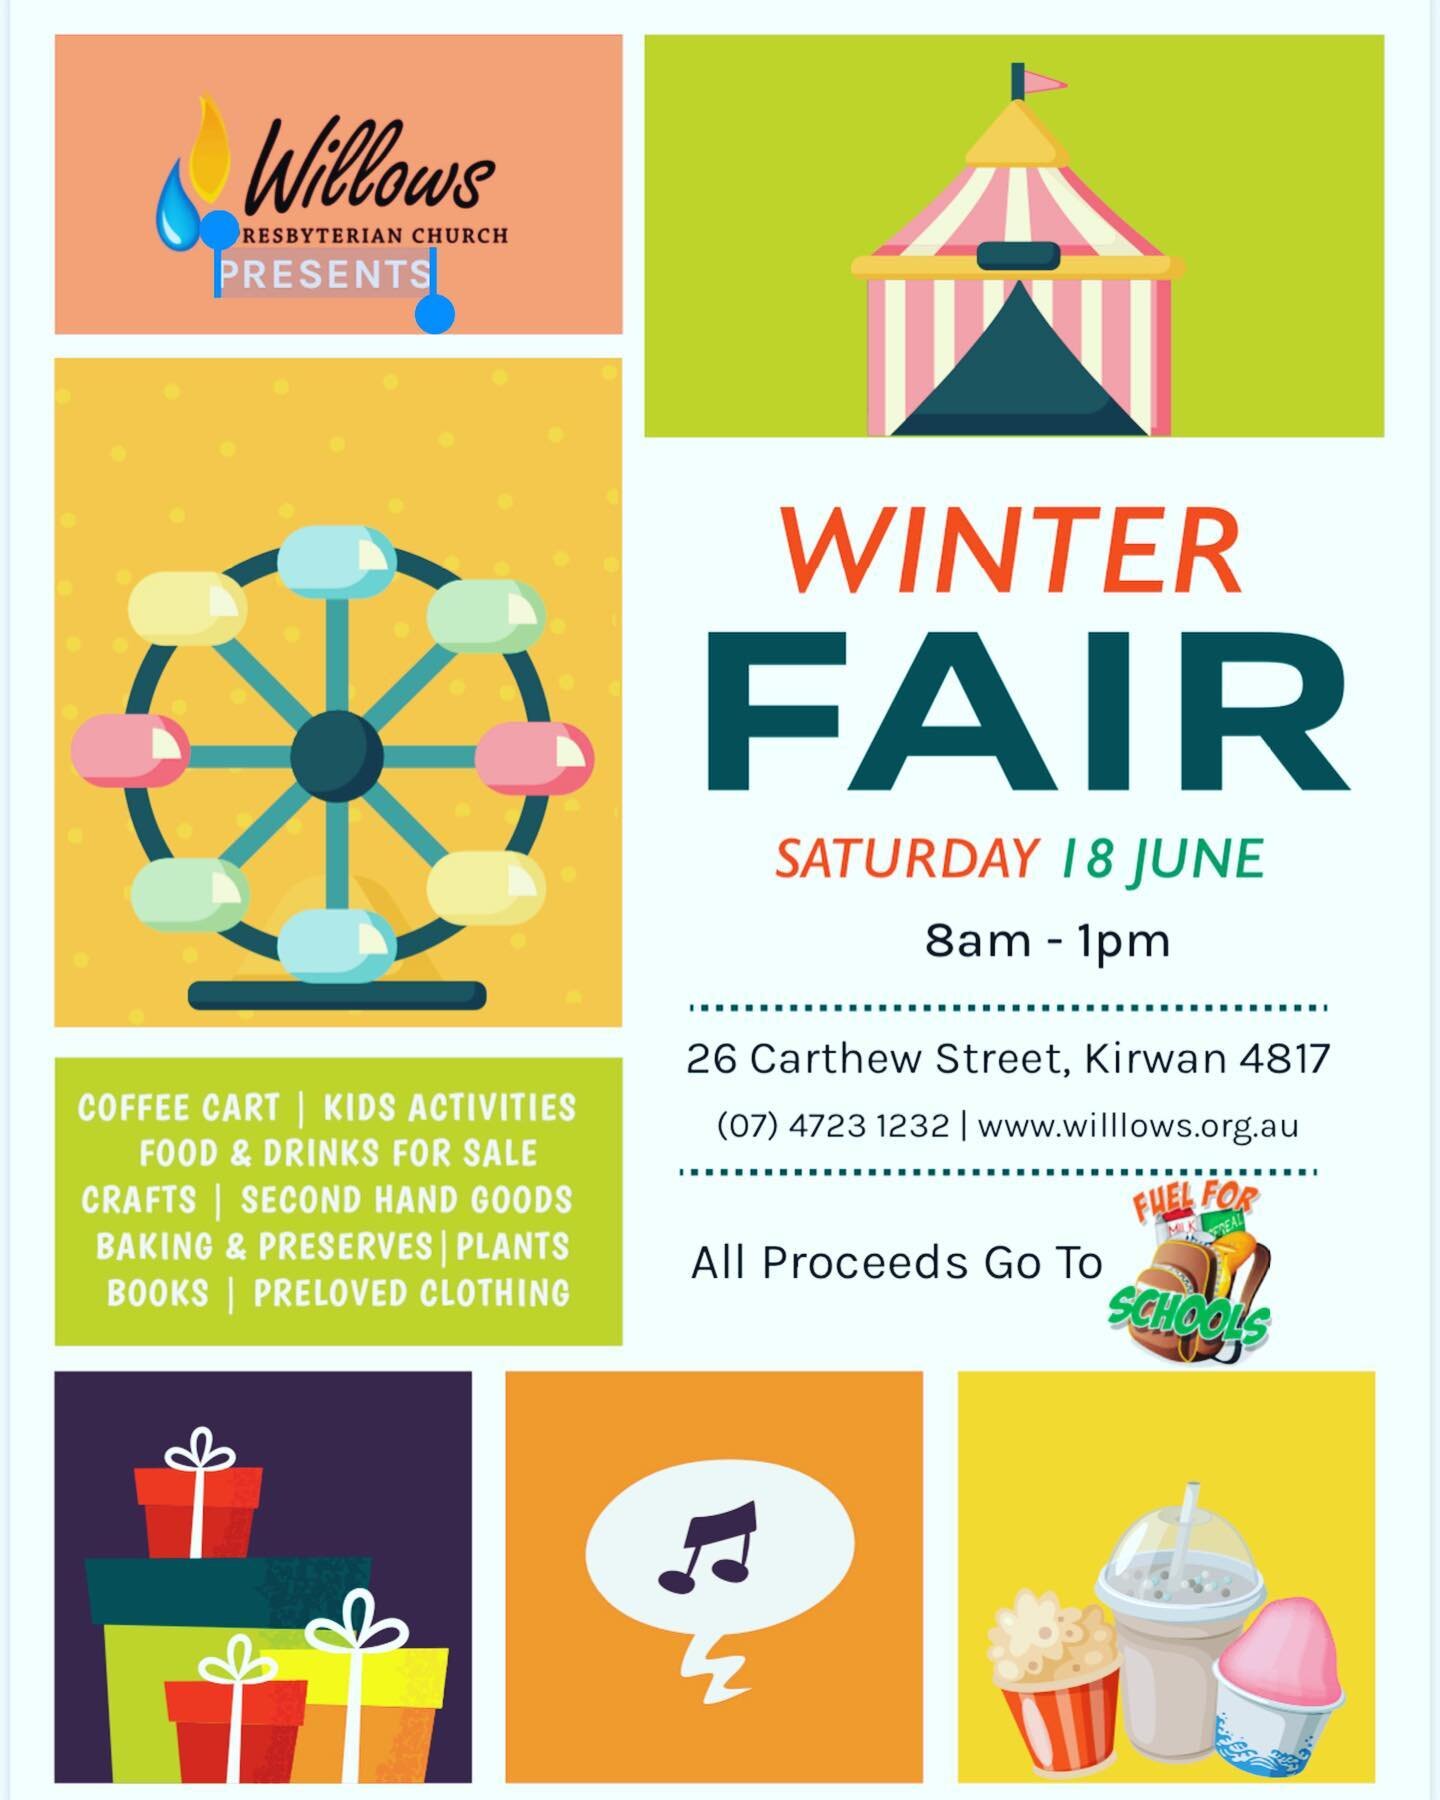 Who doesn't love a Fair !!

Please join us at the Willows Presbyterian Church Winter Fair on Saturday the 18th of June from 8am !!

#fuelforschools #supportlocaltownsville #givingback #winterfair #goodcause😀